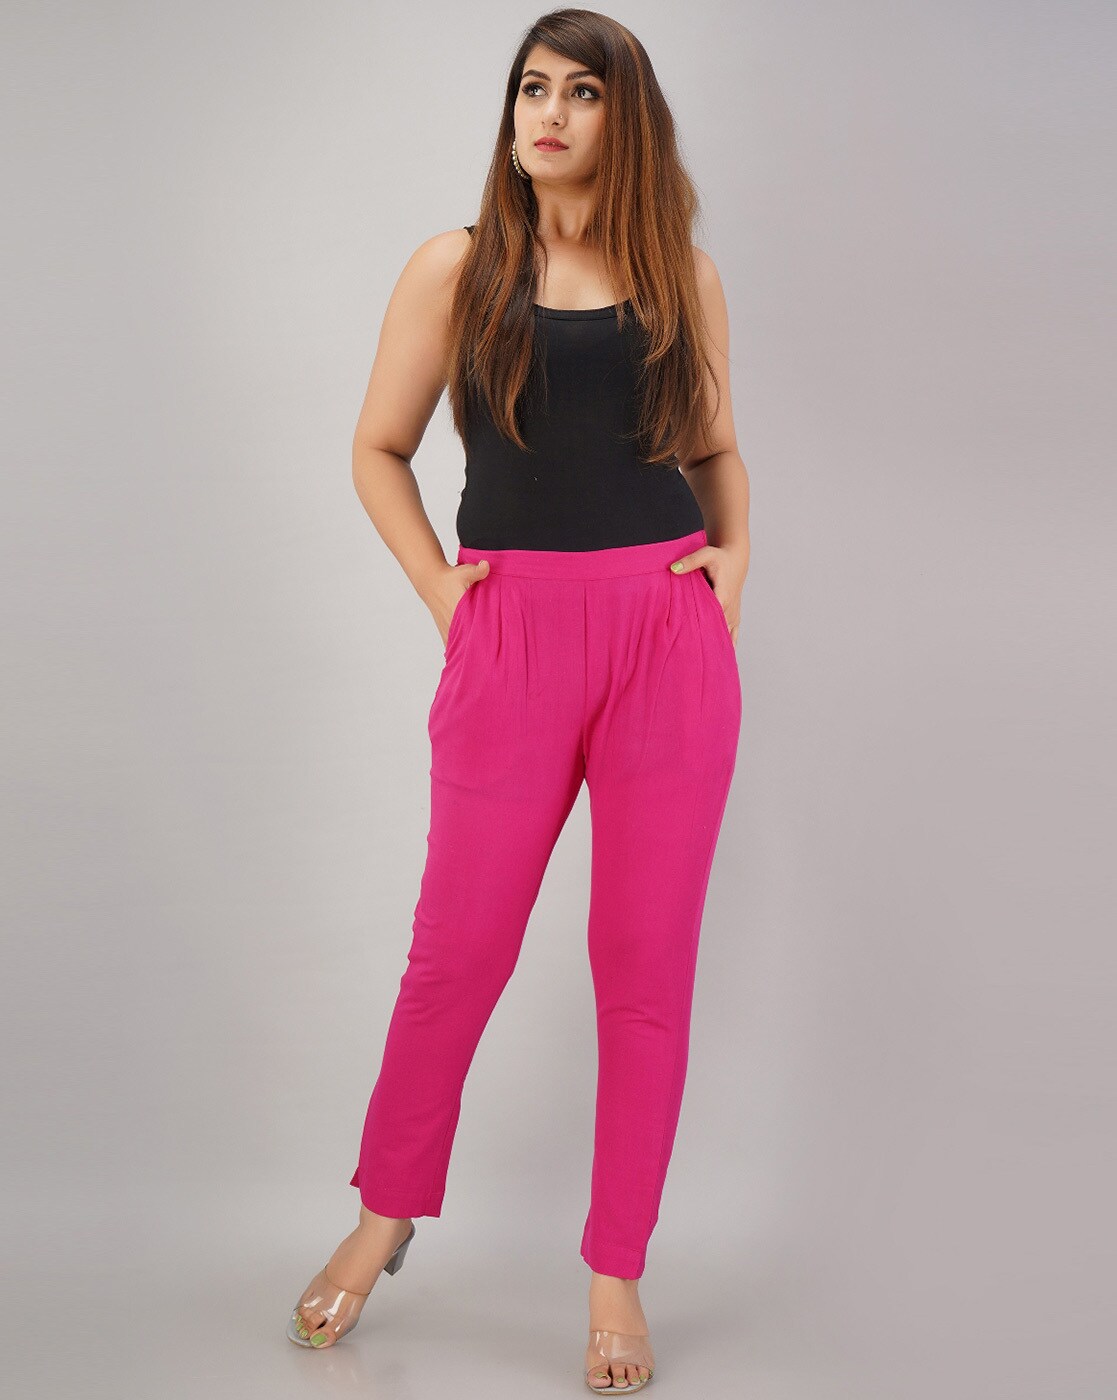 Buy GO COLORS Women's Straight Pants at Amazon.in